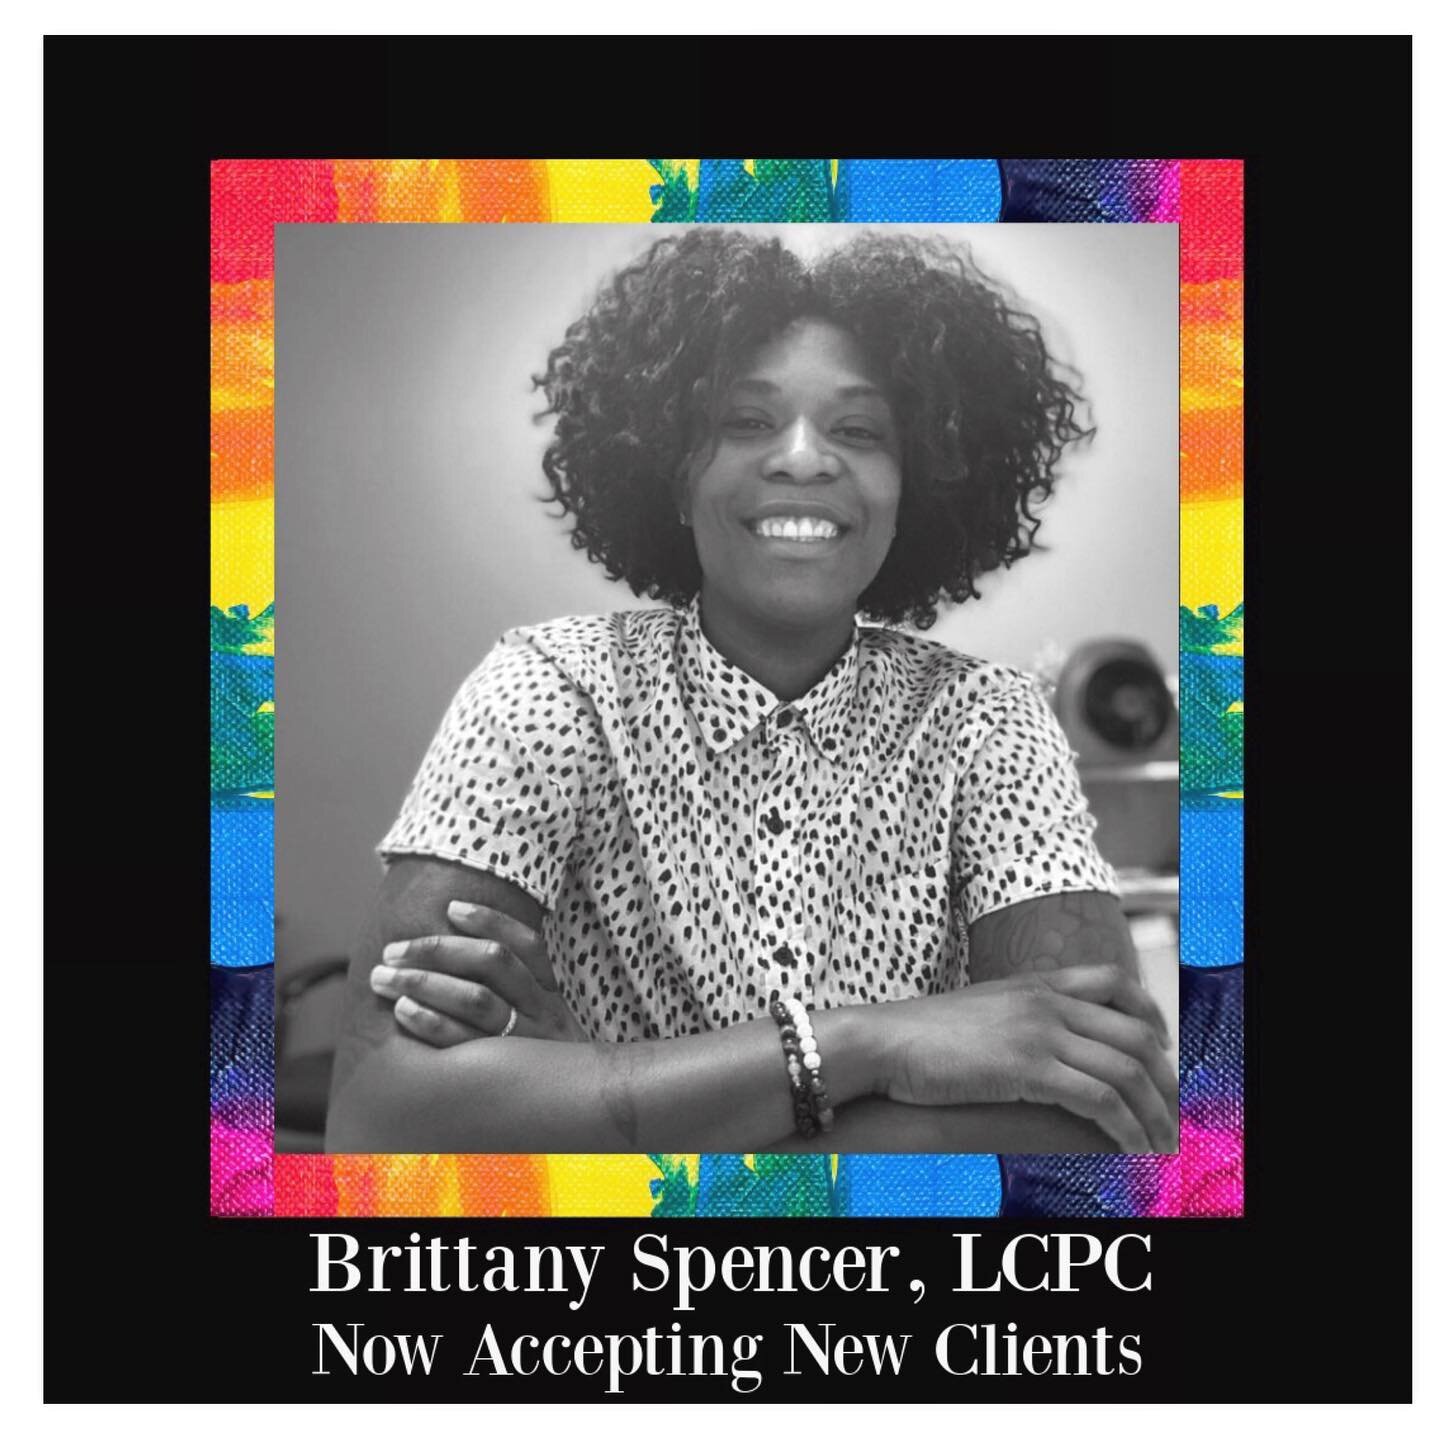 About Yesterday&hellip;.

We&rsquo;re so happy to announce that Brittany Spencer, LCPC (@Brittany_Spencer_) is officially a full time clinician at Space Between Counseling Services as of June 1st.

Brittany has been a member of the SBCS team since sh